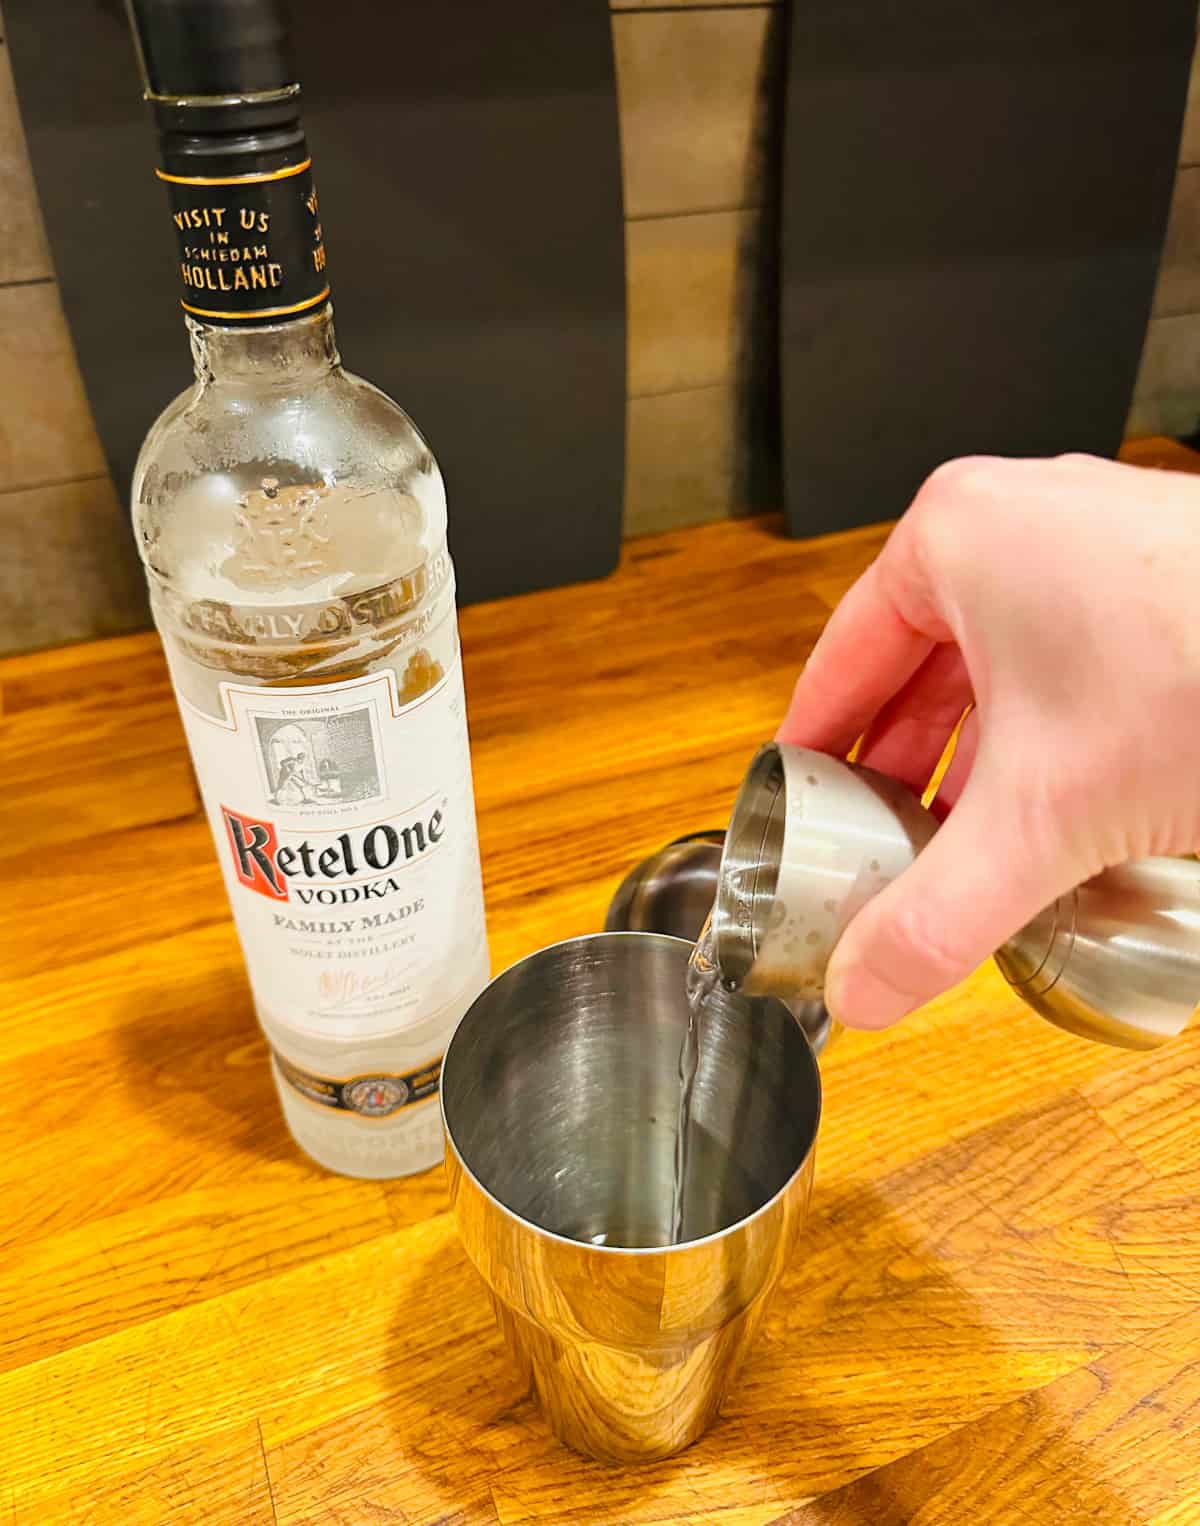 Clear liquid being poured from a steel measuring jigger into a cocktail shaker next to a bottle of Ketel One vodka.